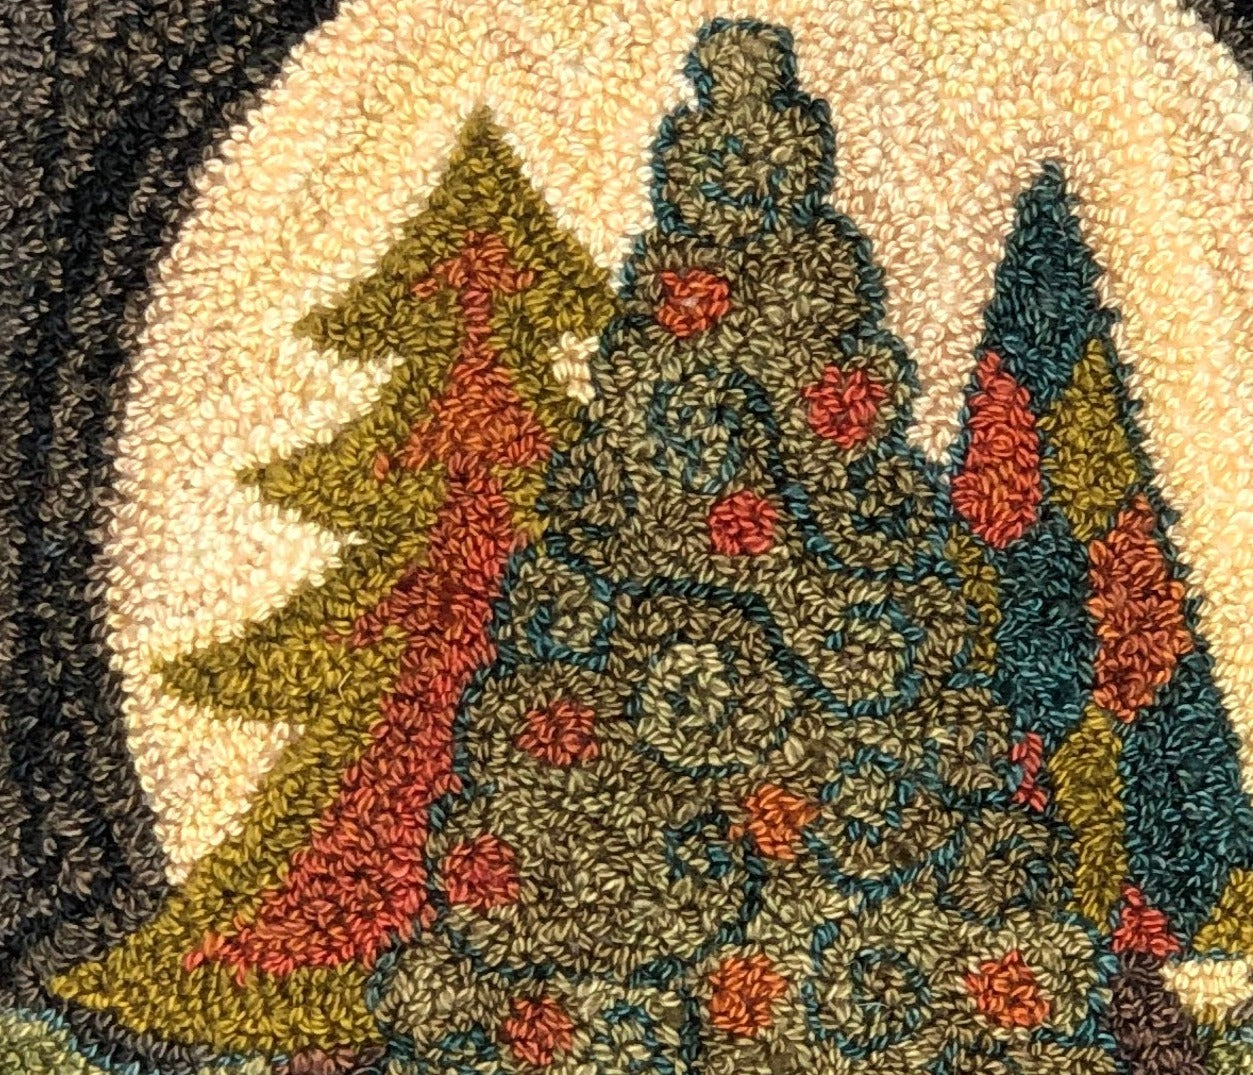 Moon Trees Pattern on Linen for Rug Hooking or Rug Punch Needle by Orphaned Wool. This lovely design is hand drawn on quality linen. Enjoy these colorful trees highlighted by the moon.